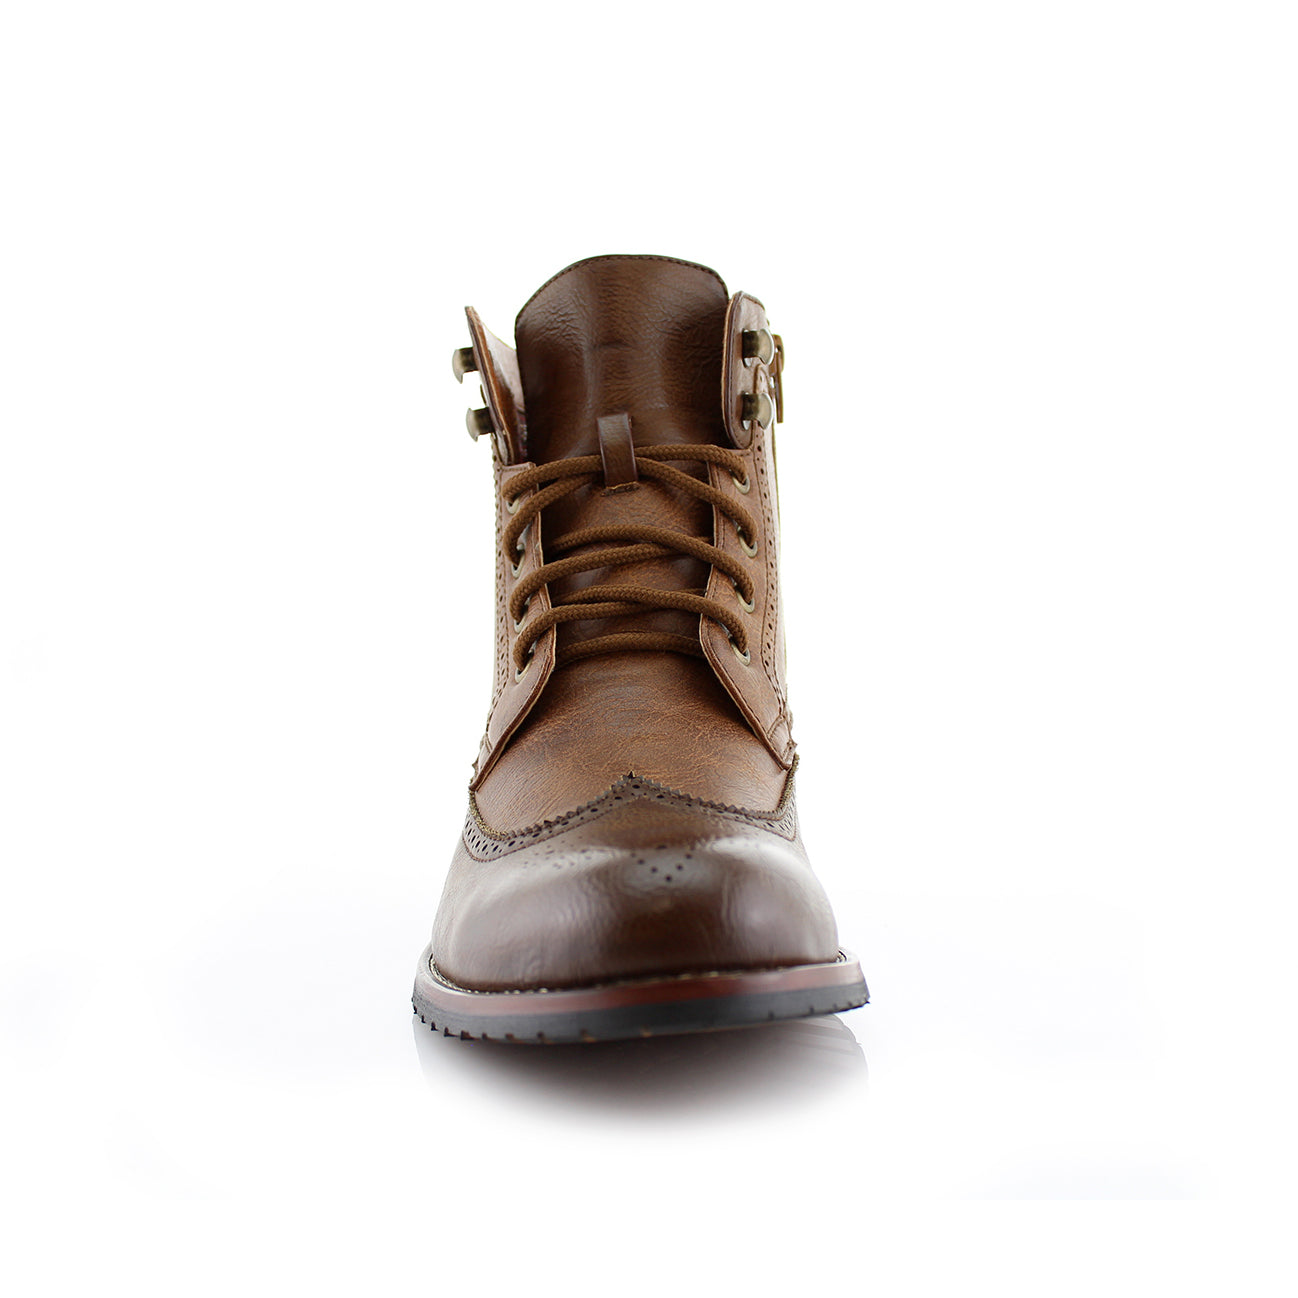 Two-Toned Wingtip Brogue | Jonah by Polar Fox | Conal Footwear | Front Angle View